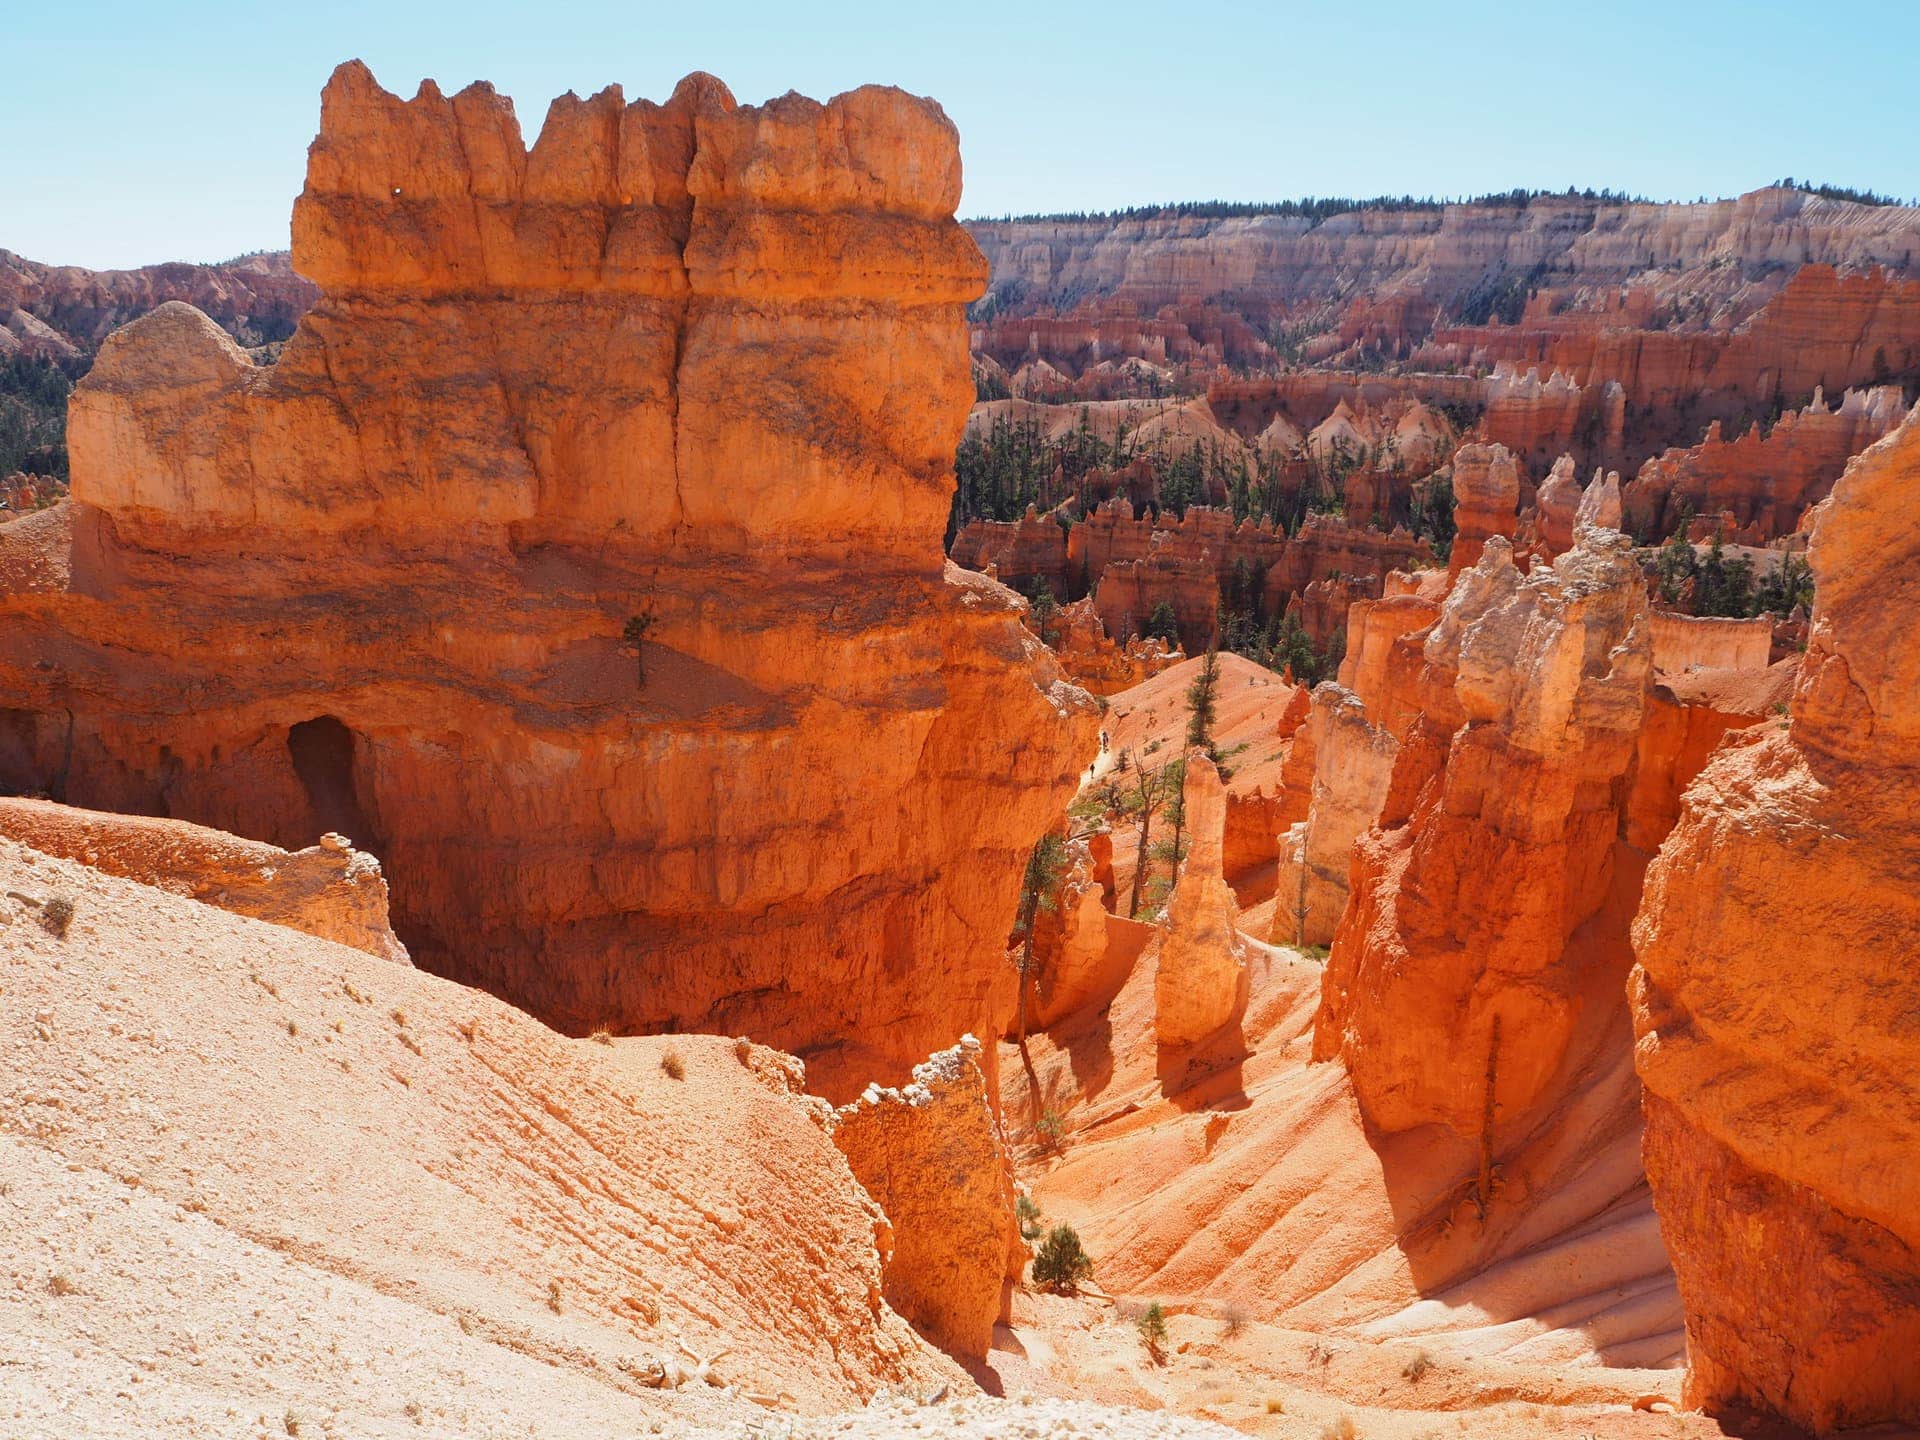 Looking down into Bryce Canyon National Park